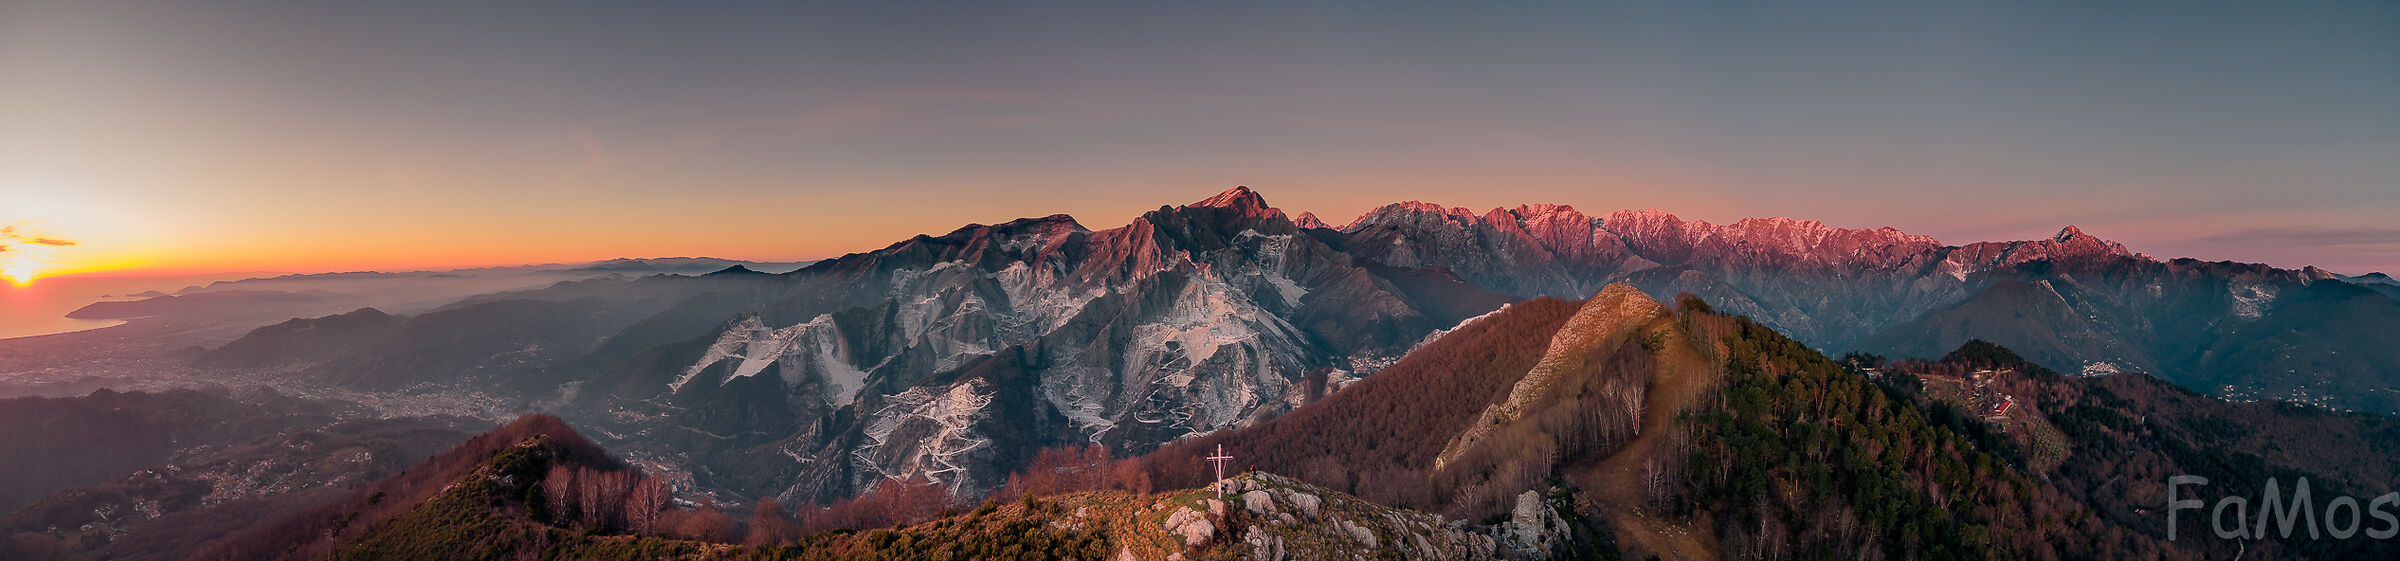 Sunset over the Apuan Alps...